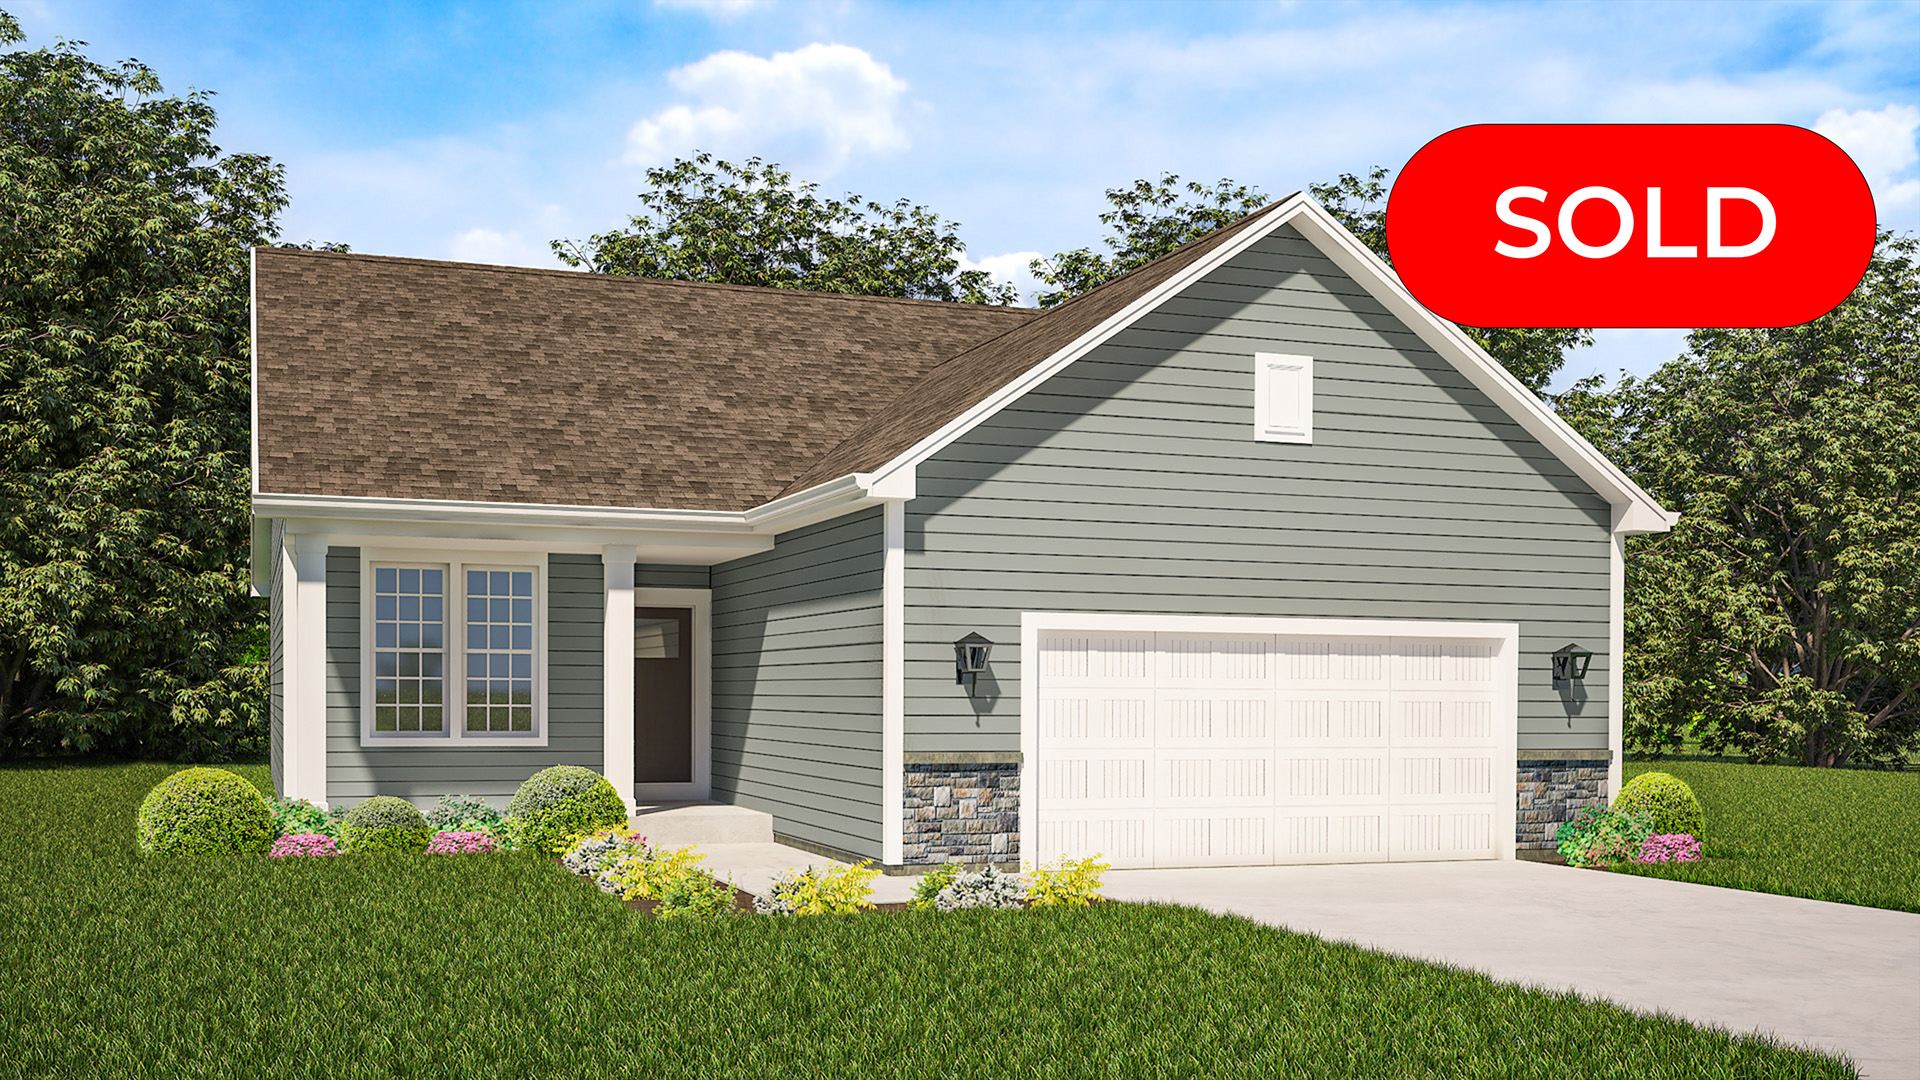 The Neenah Home Model Rendering Stepping Stone Homes Wisconsin